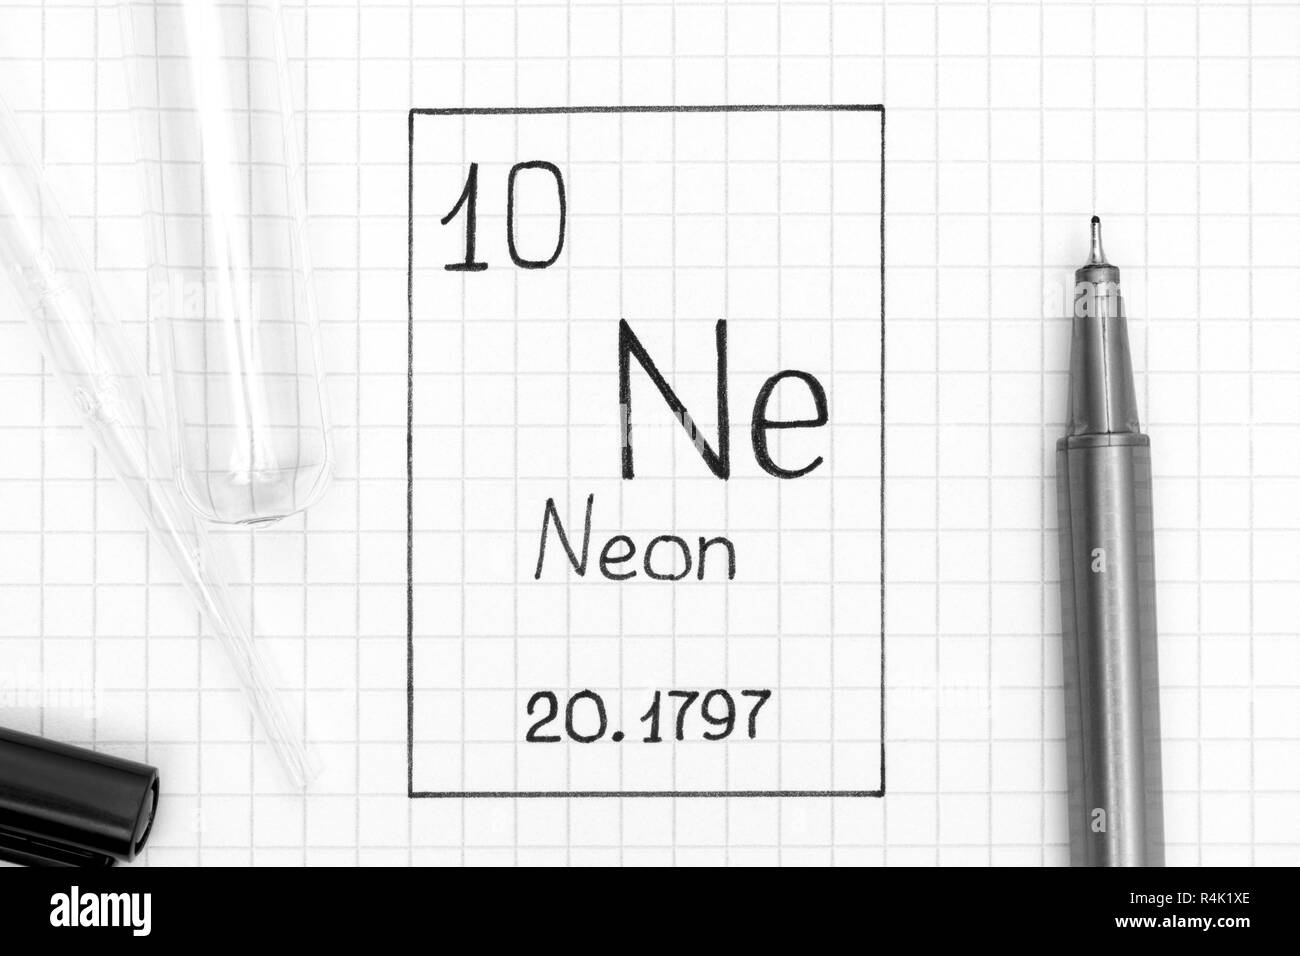 The Periodic table of elements. Handwriting chemical element Neon Ne with black pen, test tube and pipette. Close-up. Stock Photo